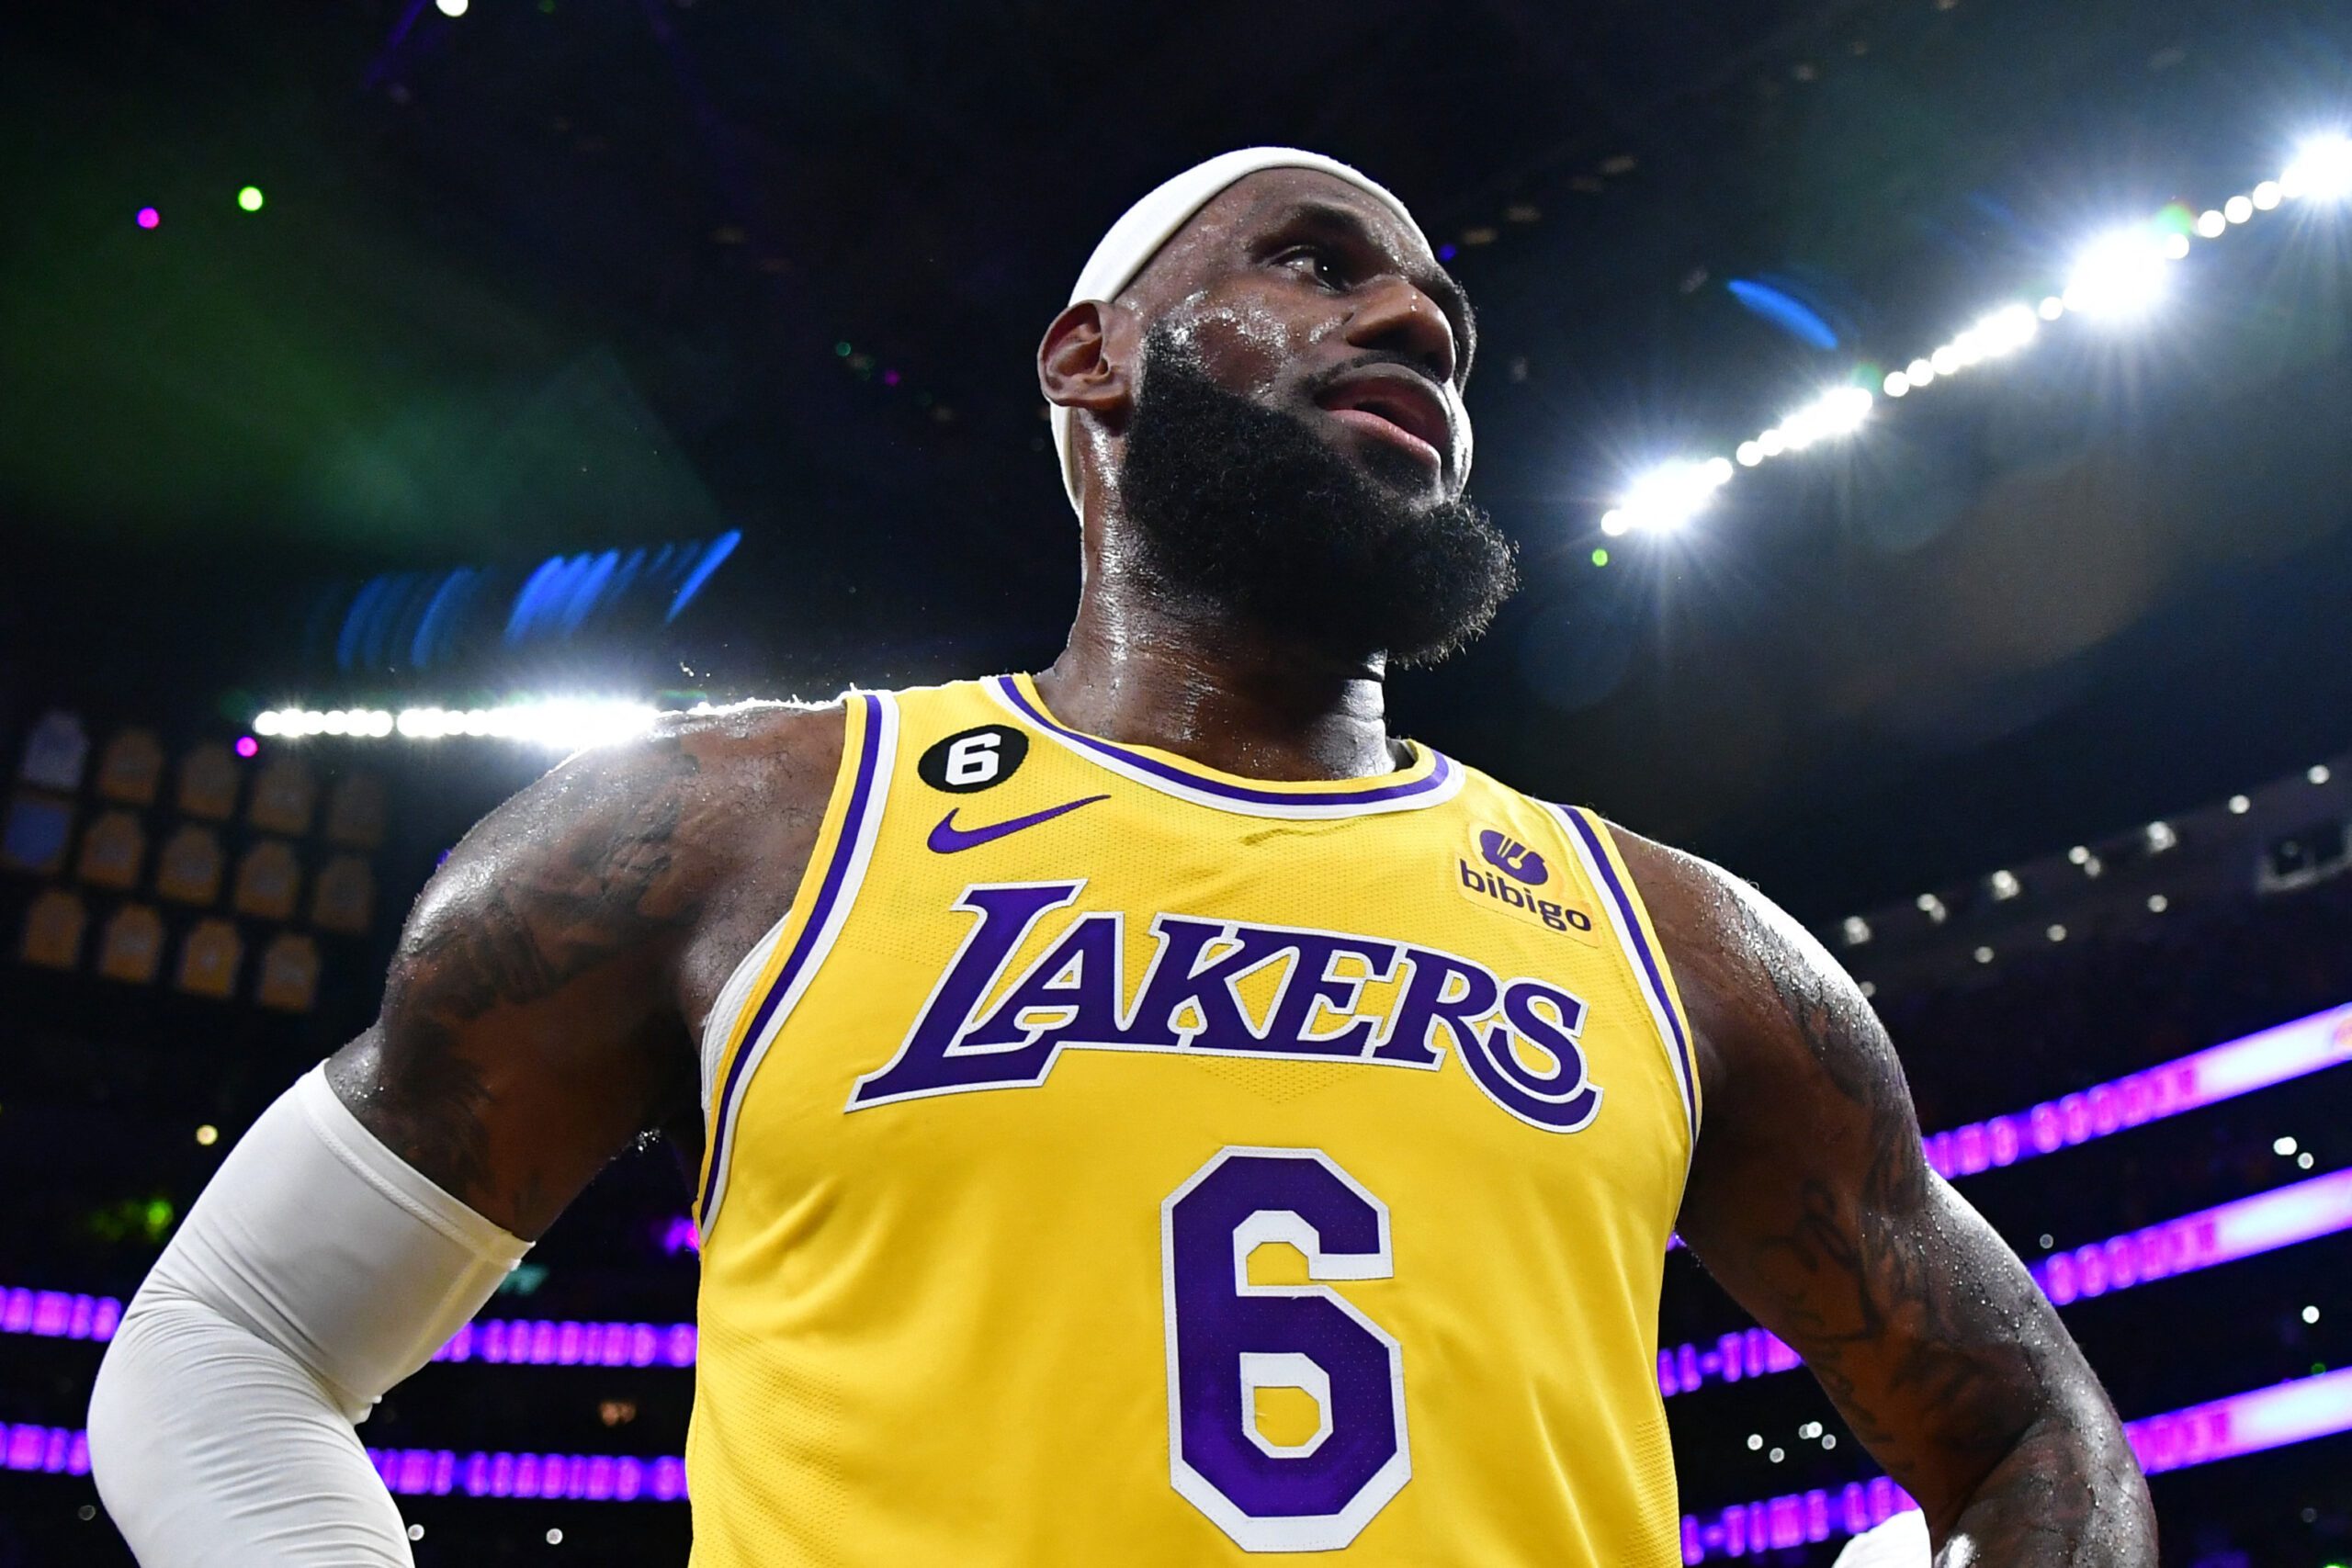 LeBron James will return to No. 23 next season out of respect for